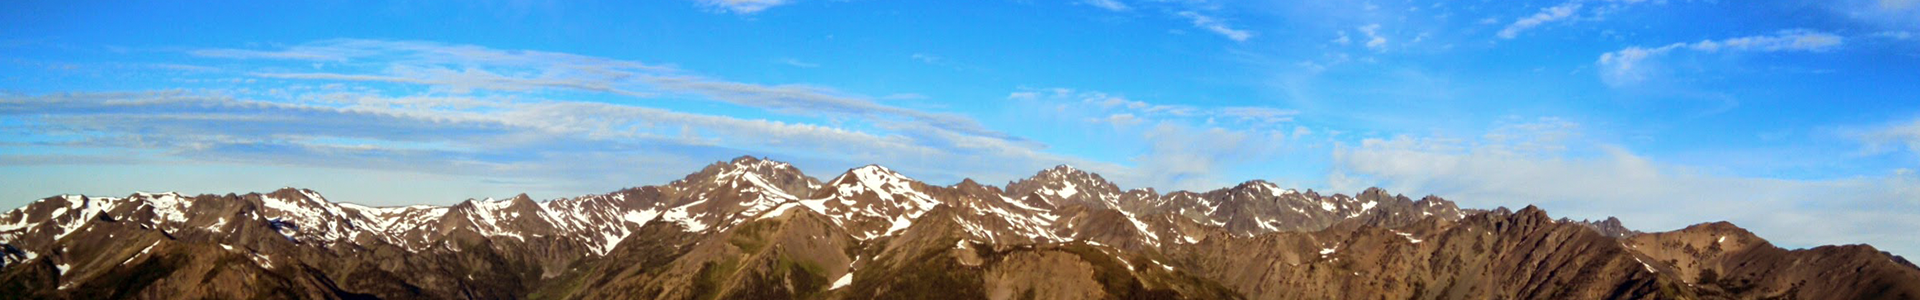 Facilitator Overview banner: Rugged mountaintops with a blue sky in the background